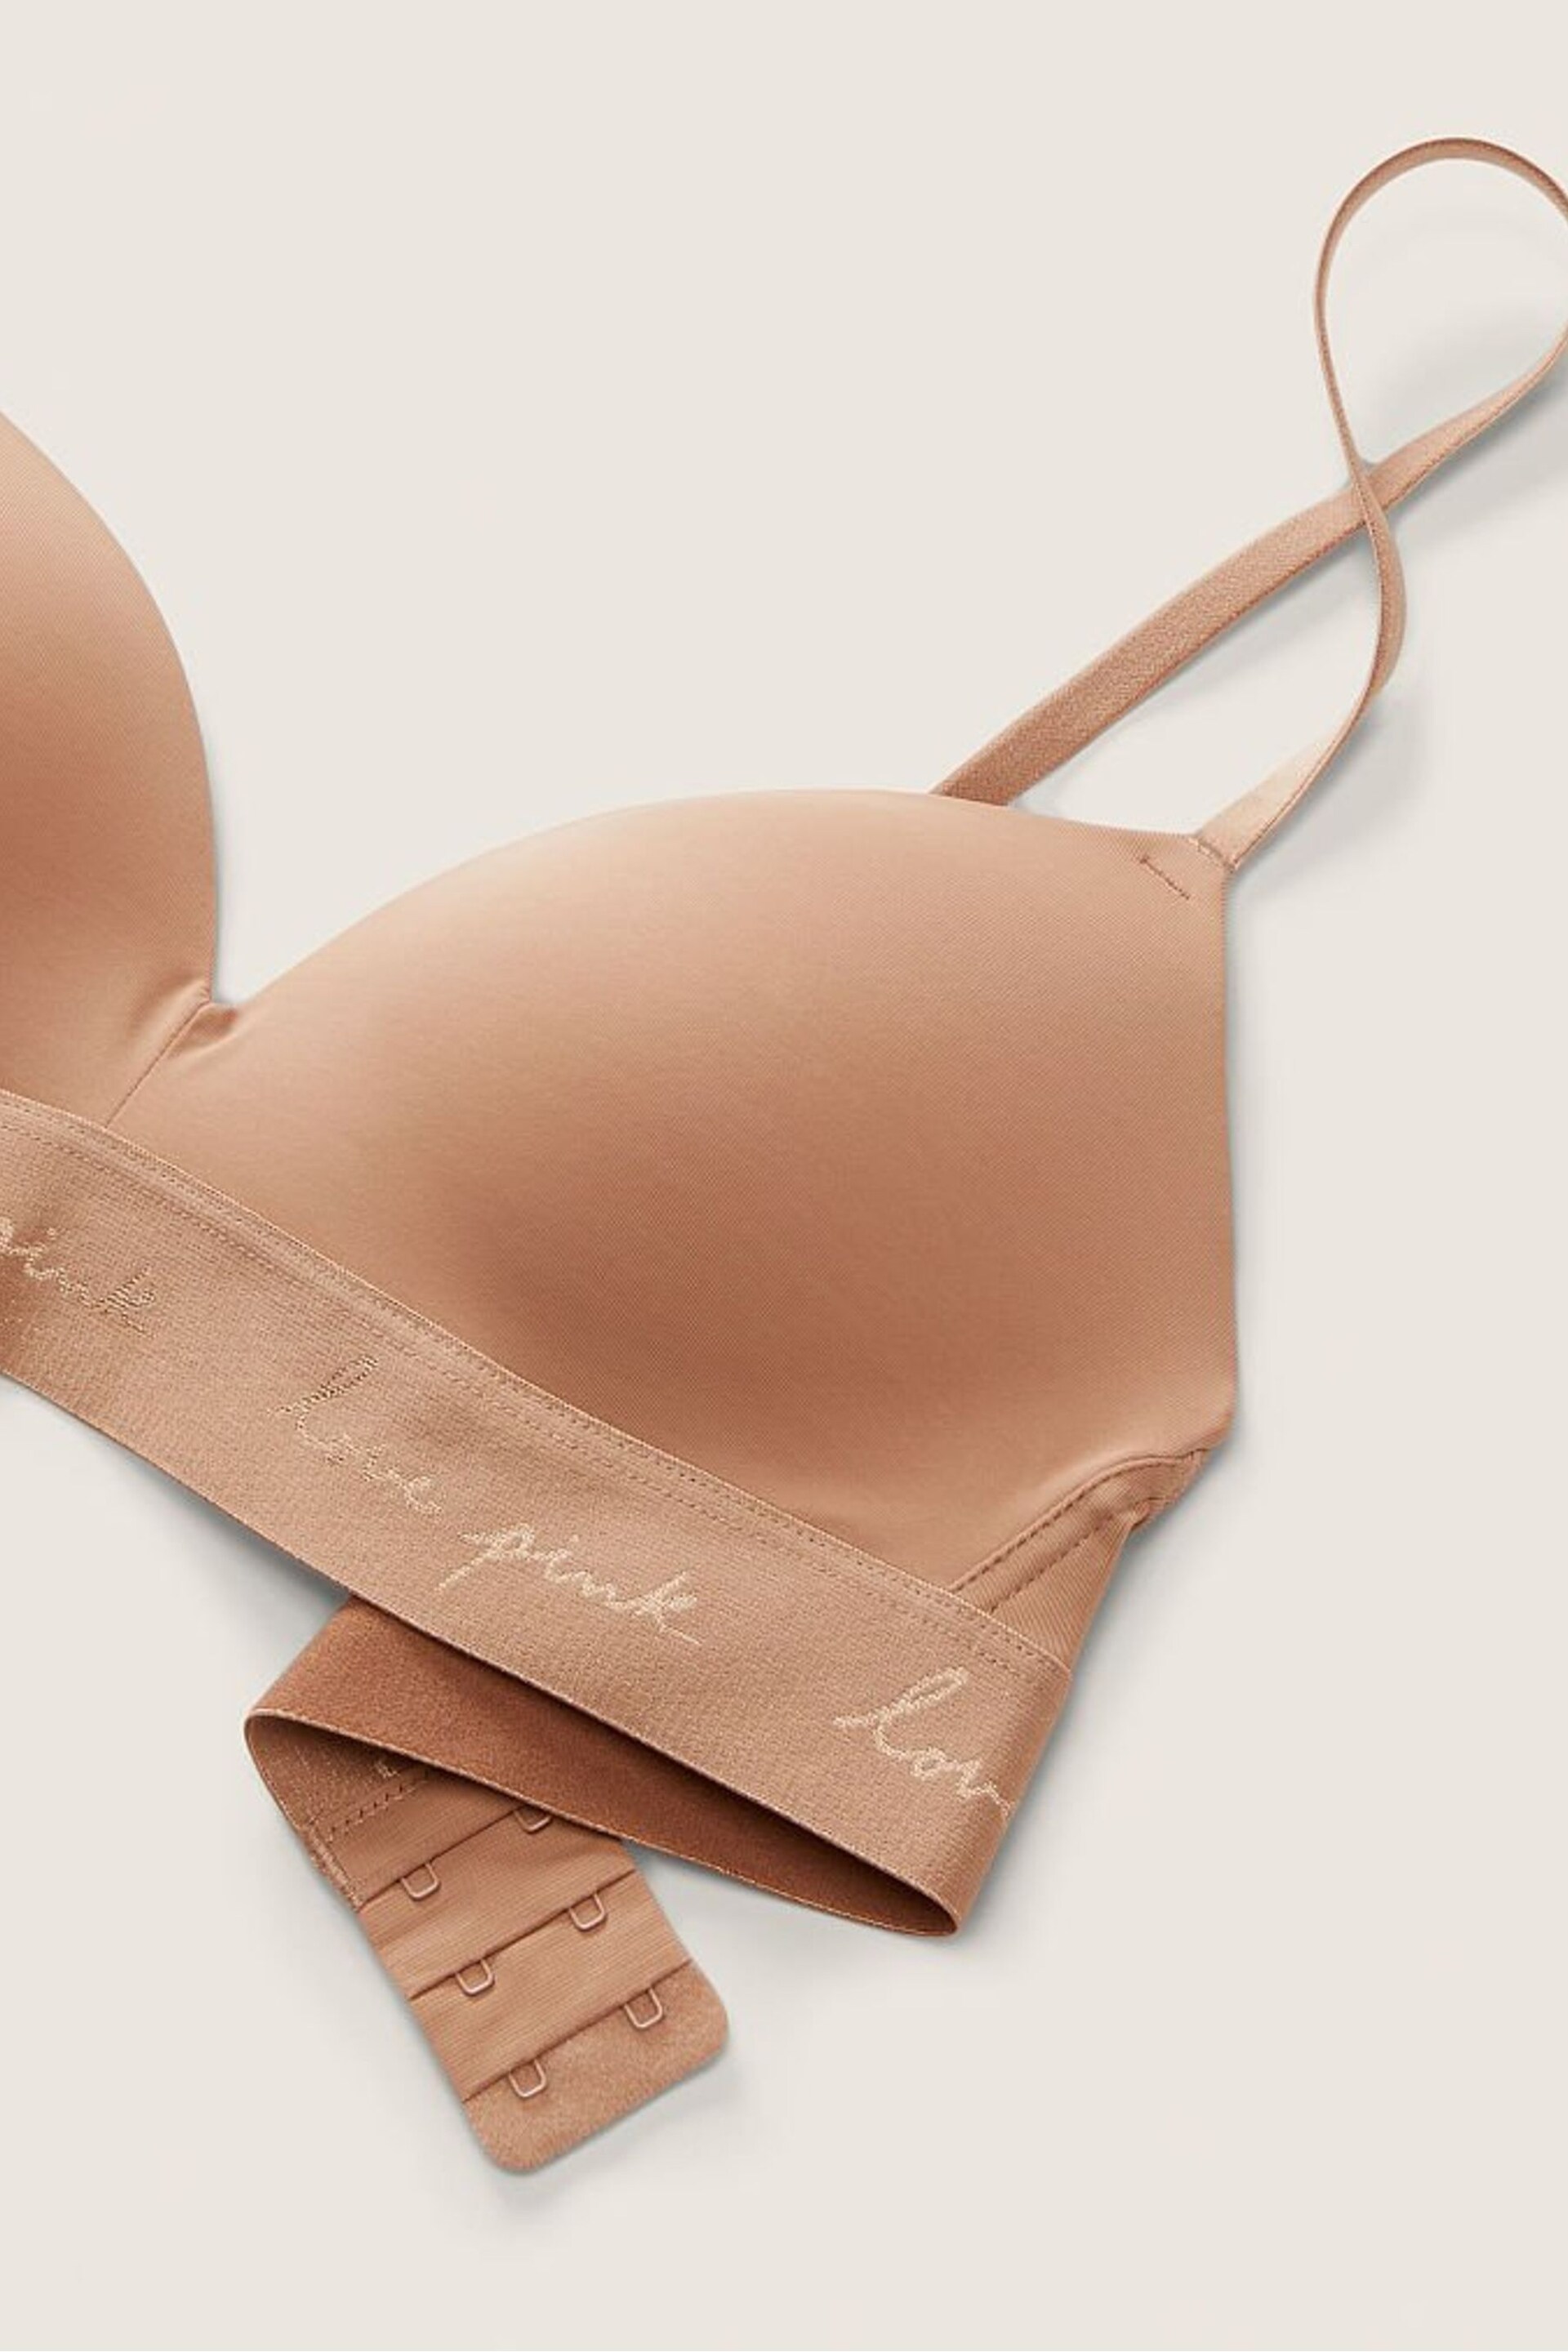 Victoria's Secret PINK Mocha Latte Nude Non Wired Push Up Smooth T-Shirt Bra - Image 5 of 5